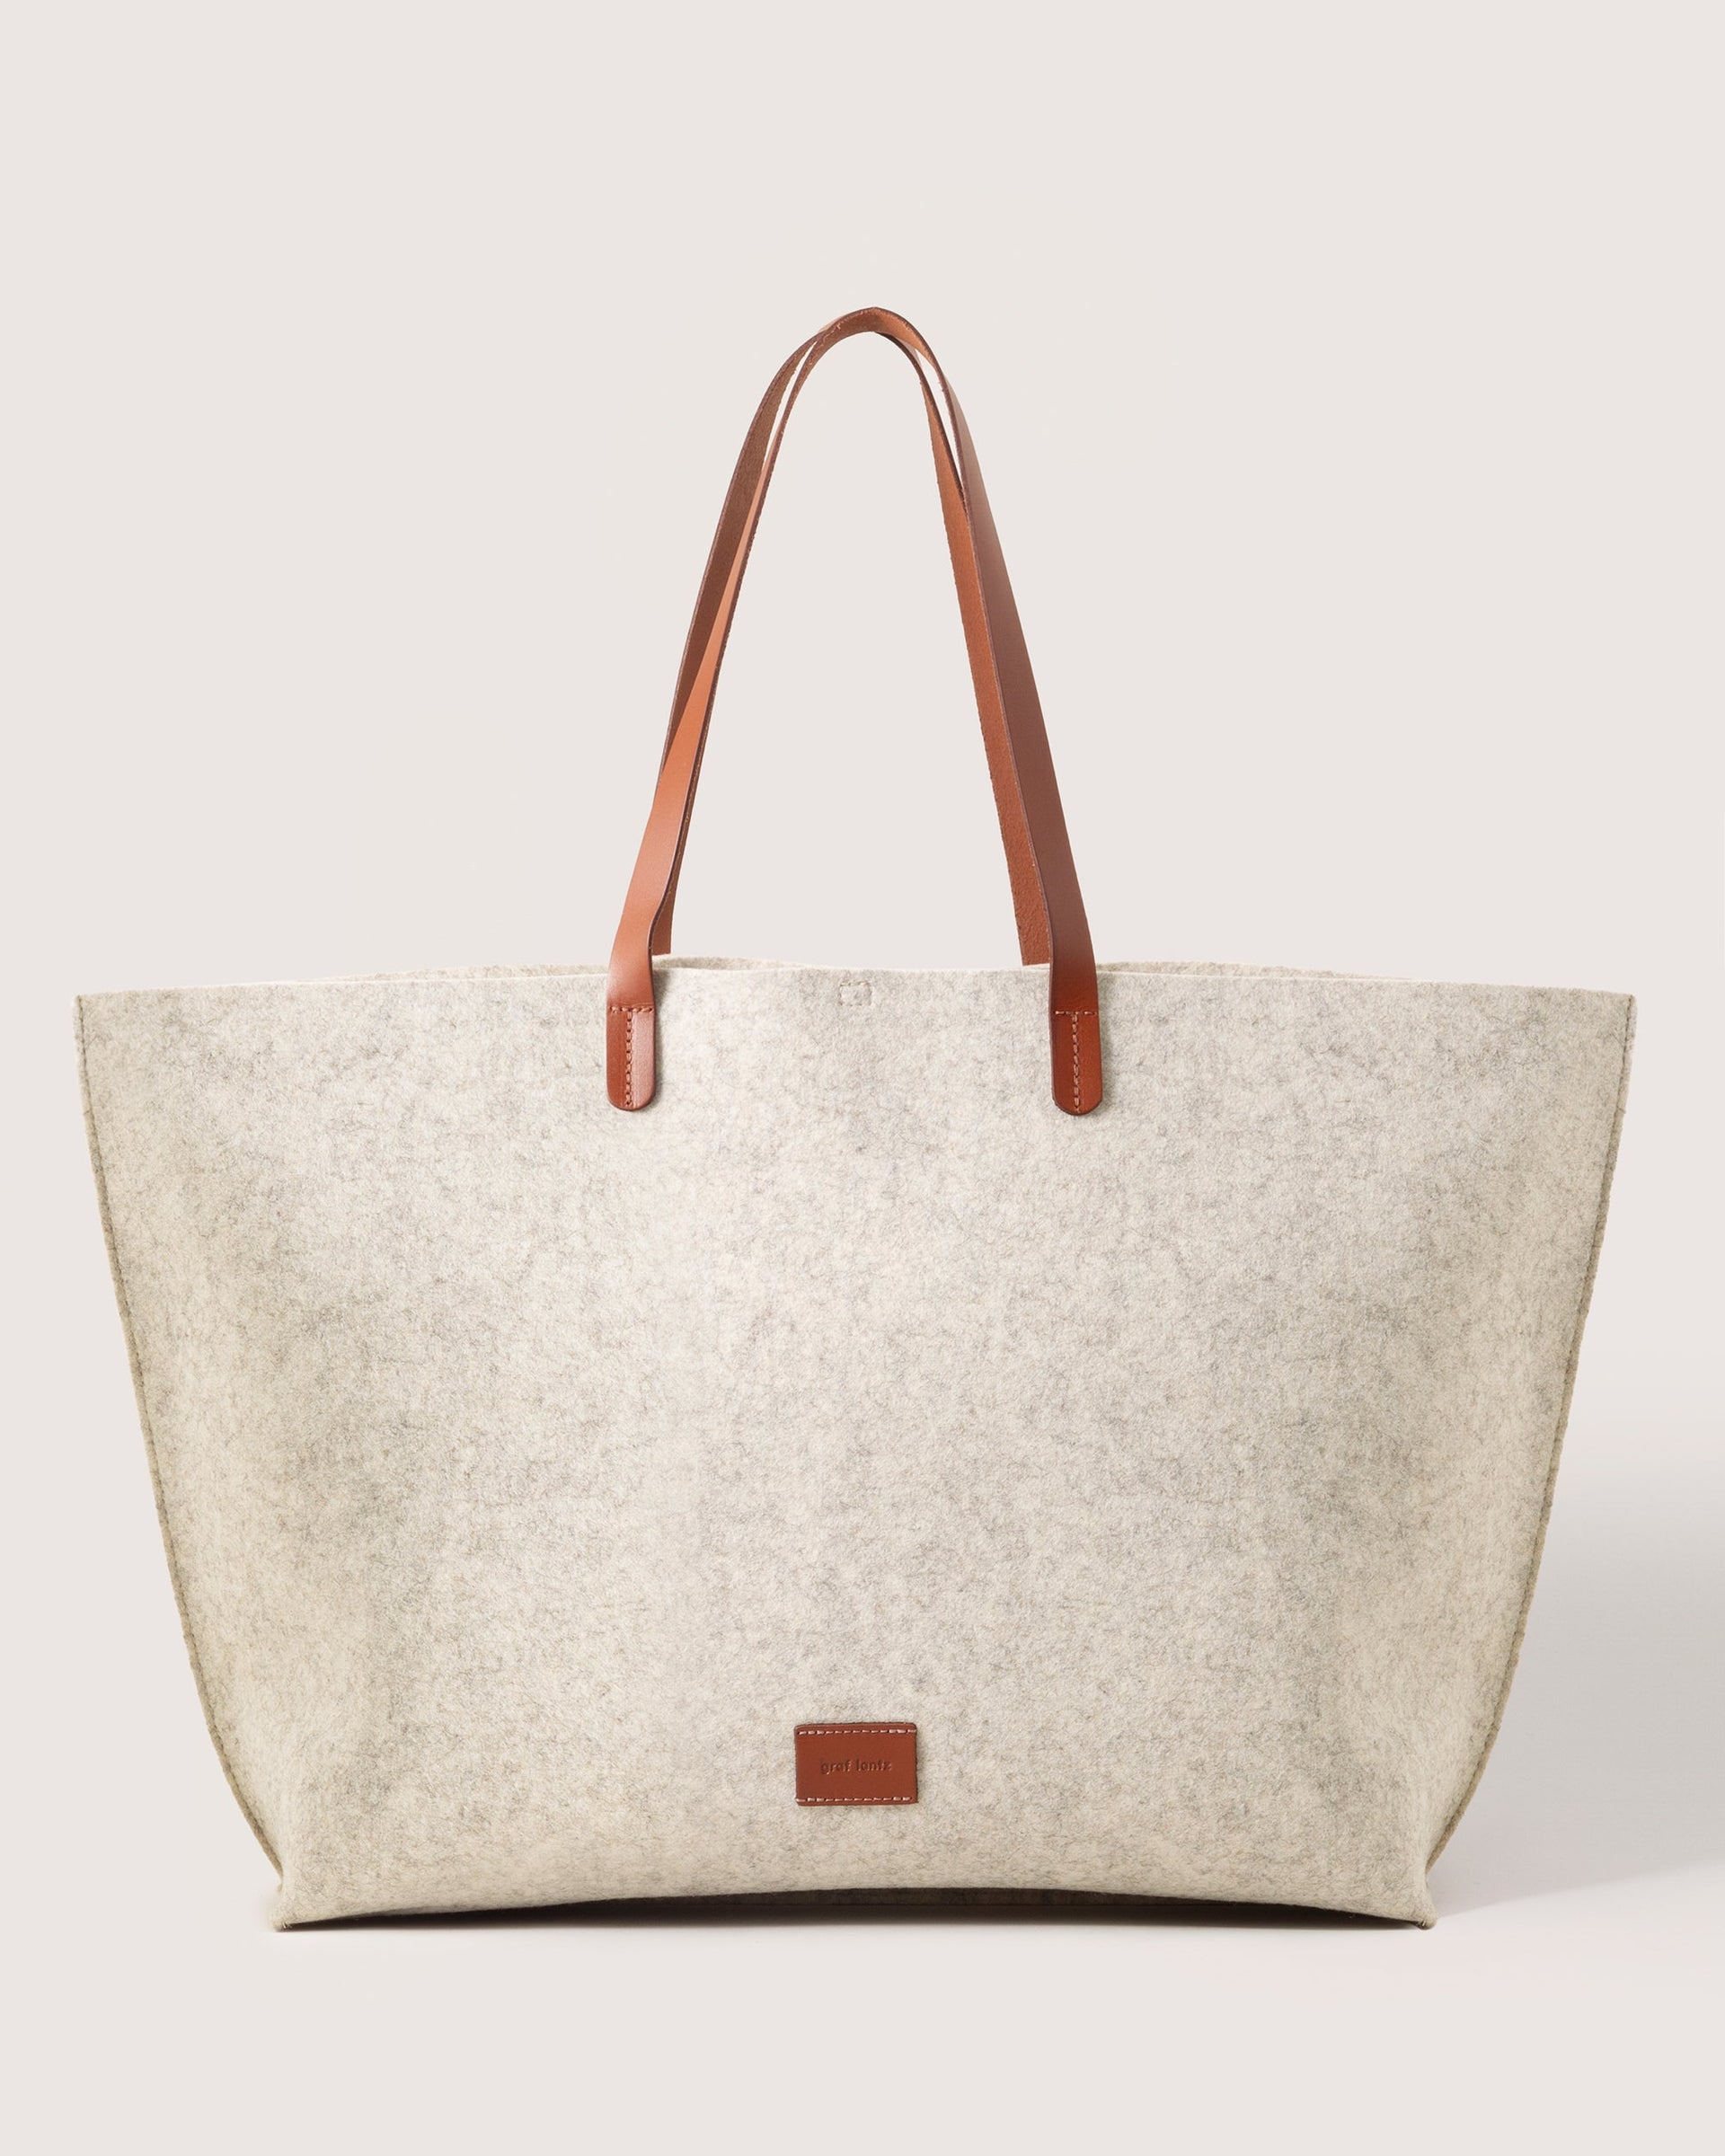 Heather white Hana Merino Wool Boat Bag with brown leather handles and brand logo, front view, white background.